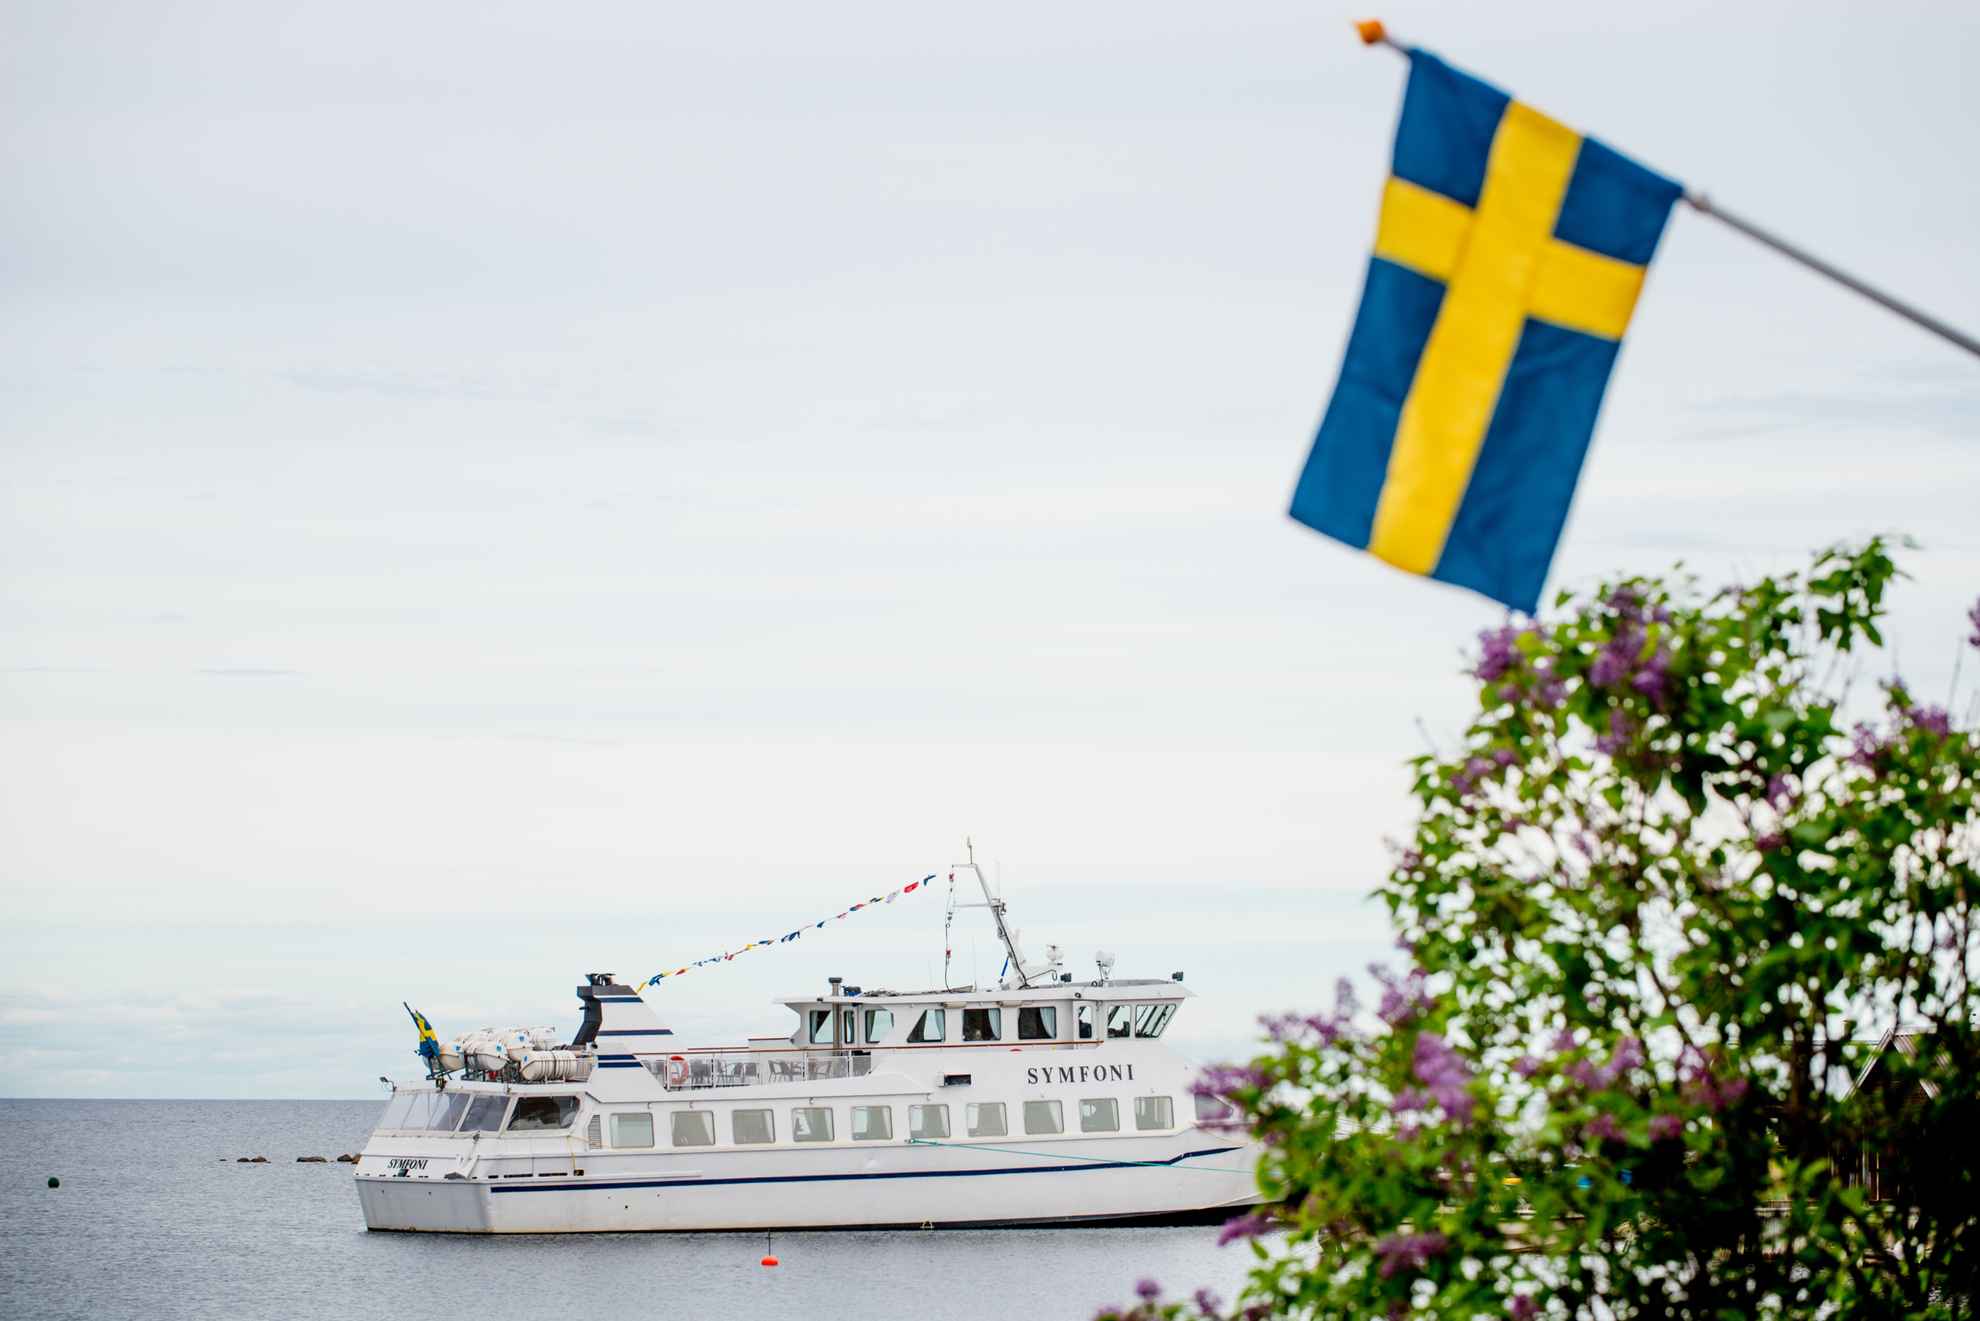 A boat named Symfoni floats in the water, with a Swedish flag and purple flowers in the foreground.